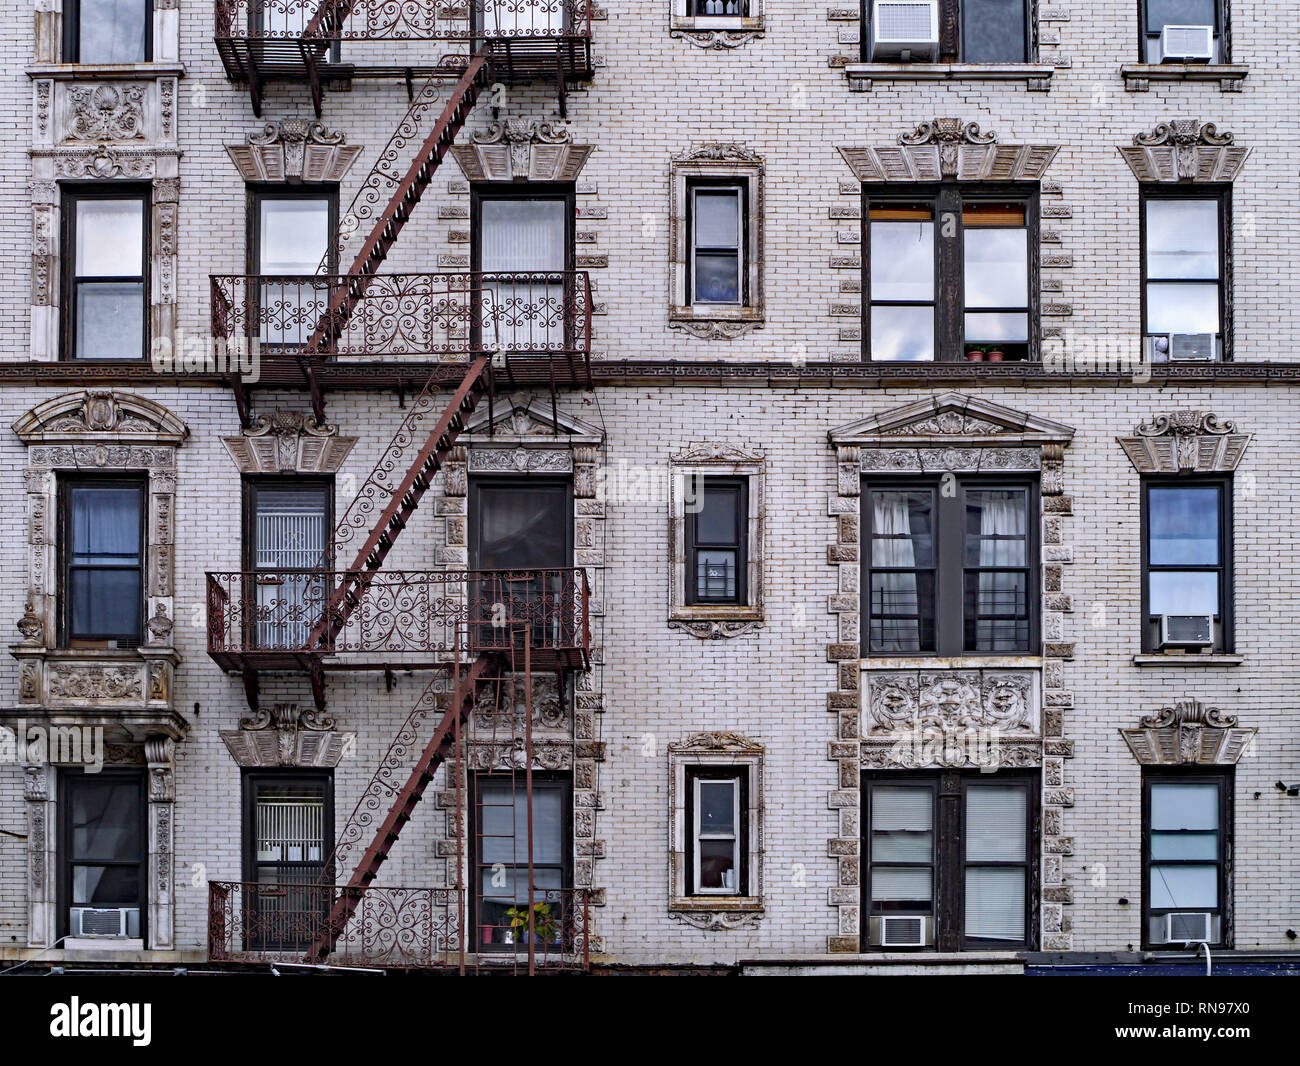 old New York apartment building with external fire escapes, window air conditioners, and ornate trim around windows Stock Photo